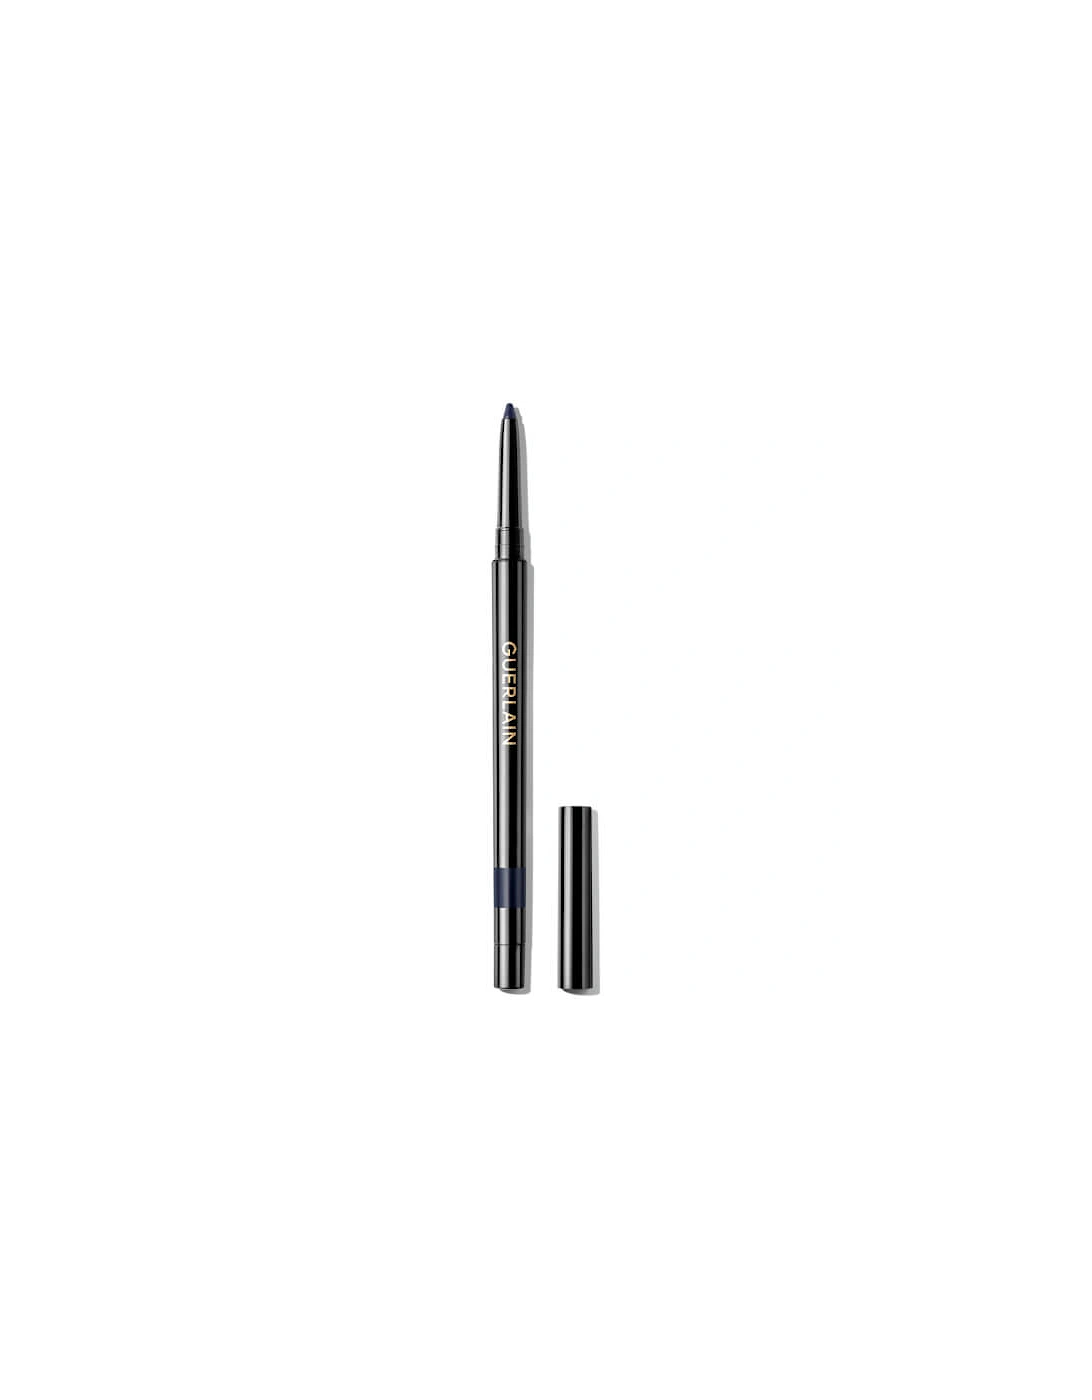 The Eye Pencil Intense Colour Long-Lasting and Waterproof - 03 Night Blue, 2 of 1